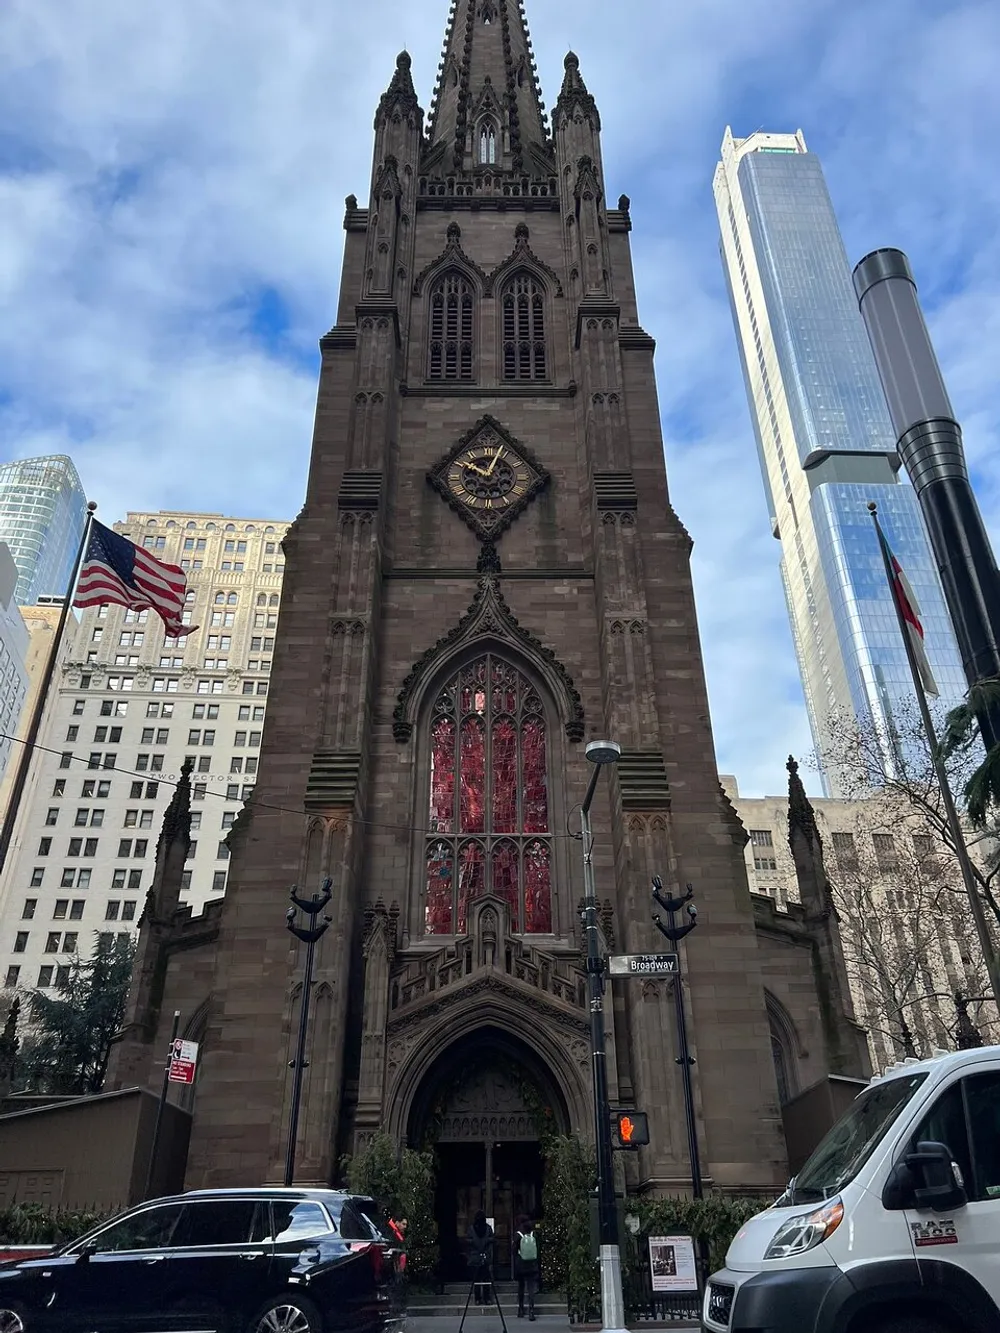 The image shows a historic stone church with a large gothic arch and stained glass window located on the corner of Broadway juxtaposed against the backdrop of modern skyscrapers and an American flag fluttering in the city